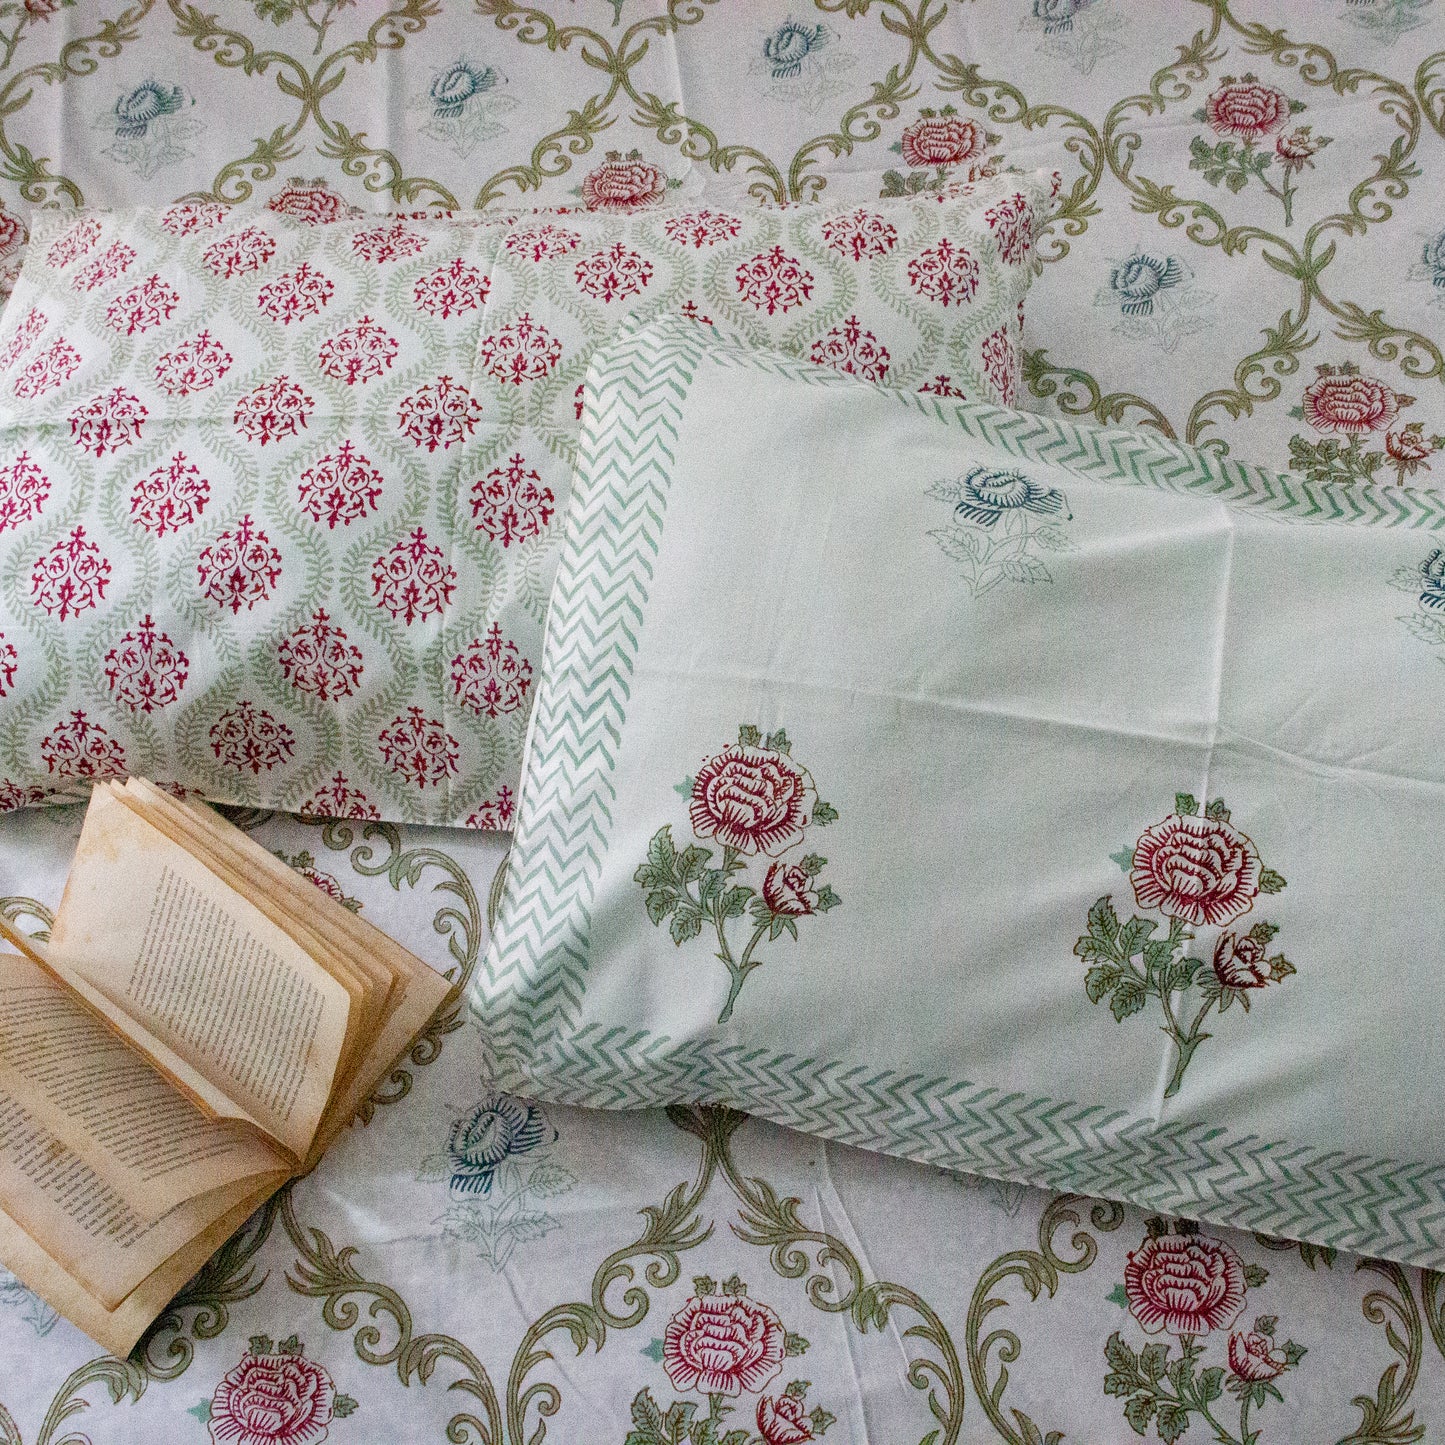 Wisteria Hand Block Printed Bed Sheets